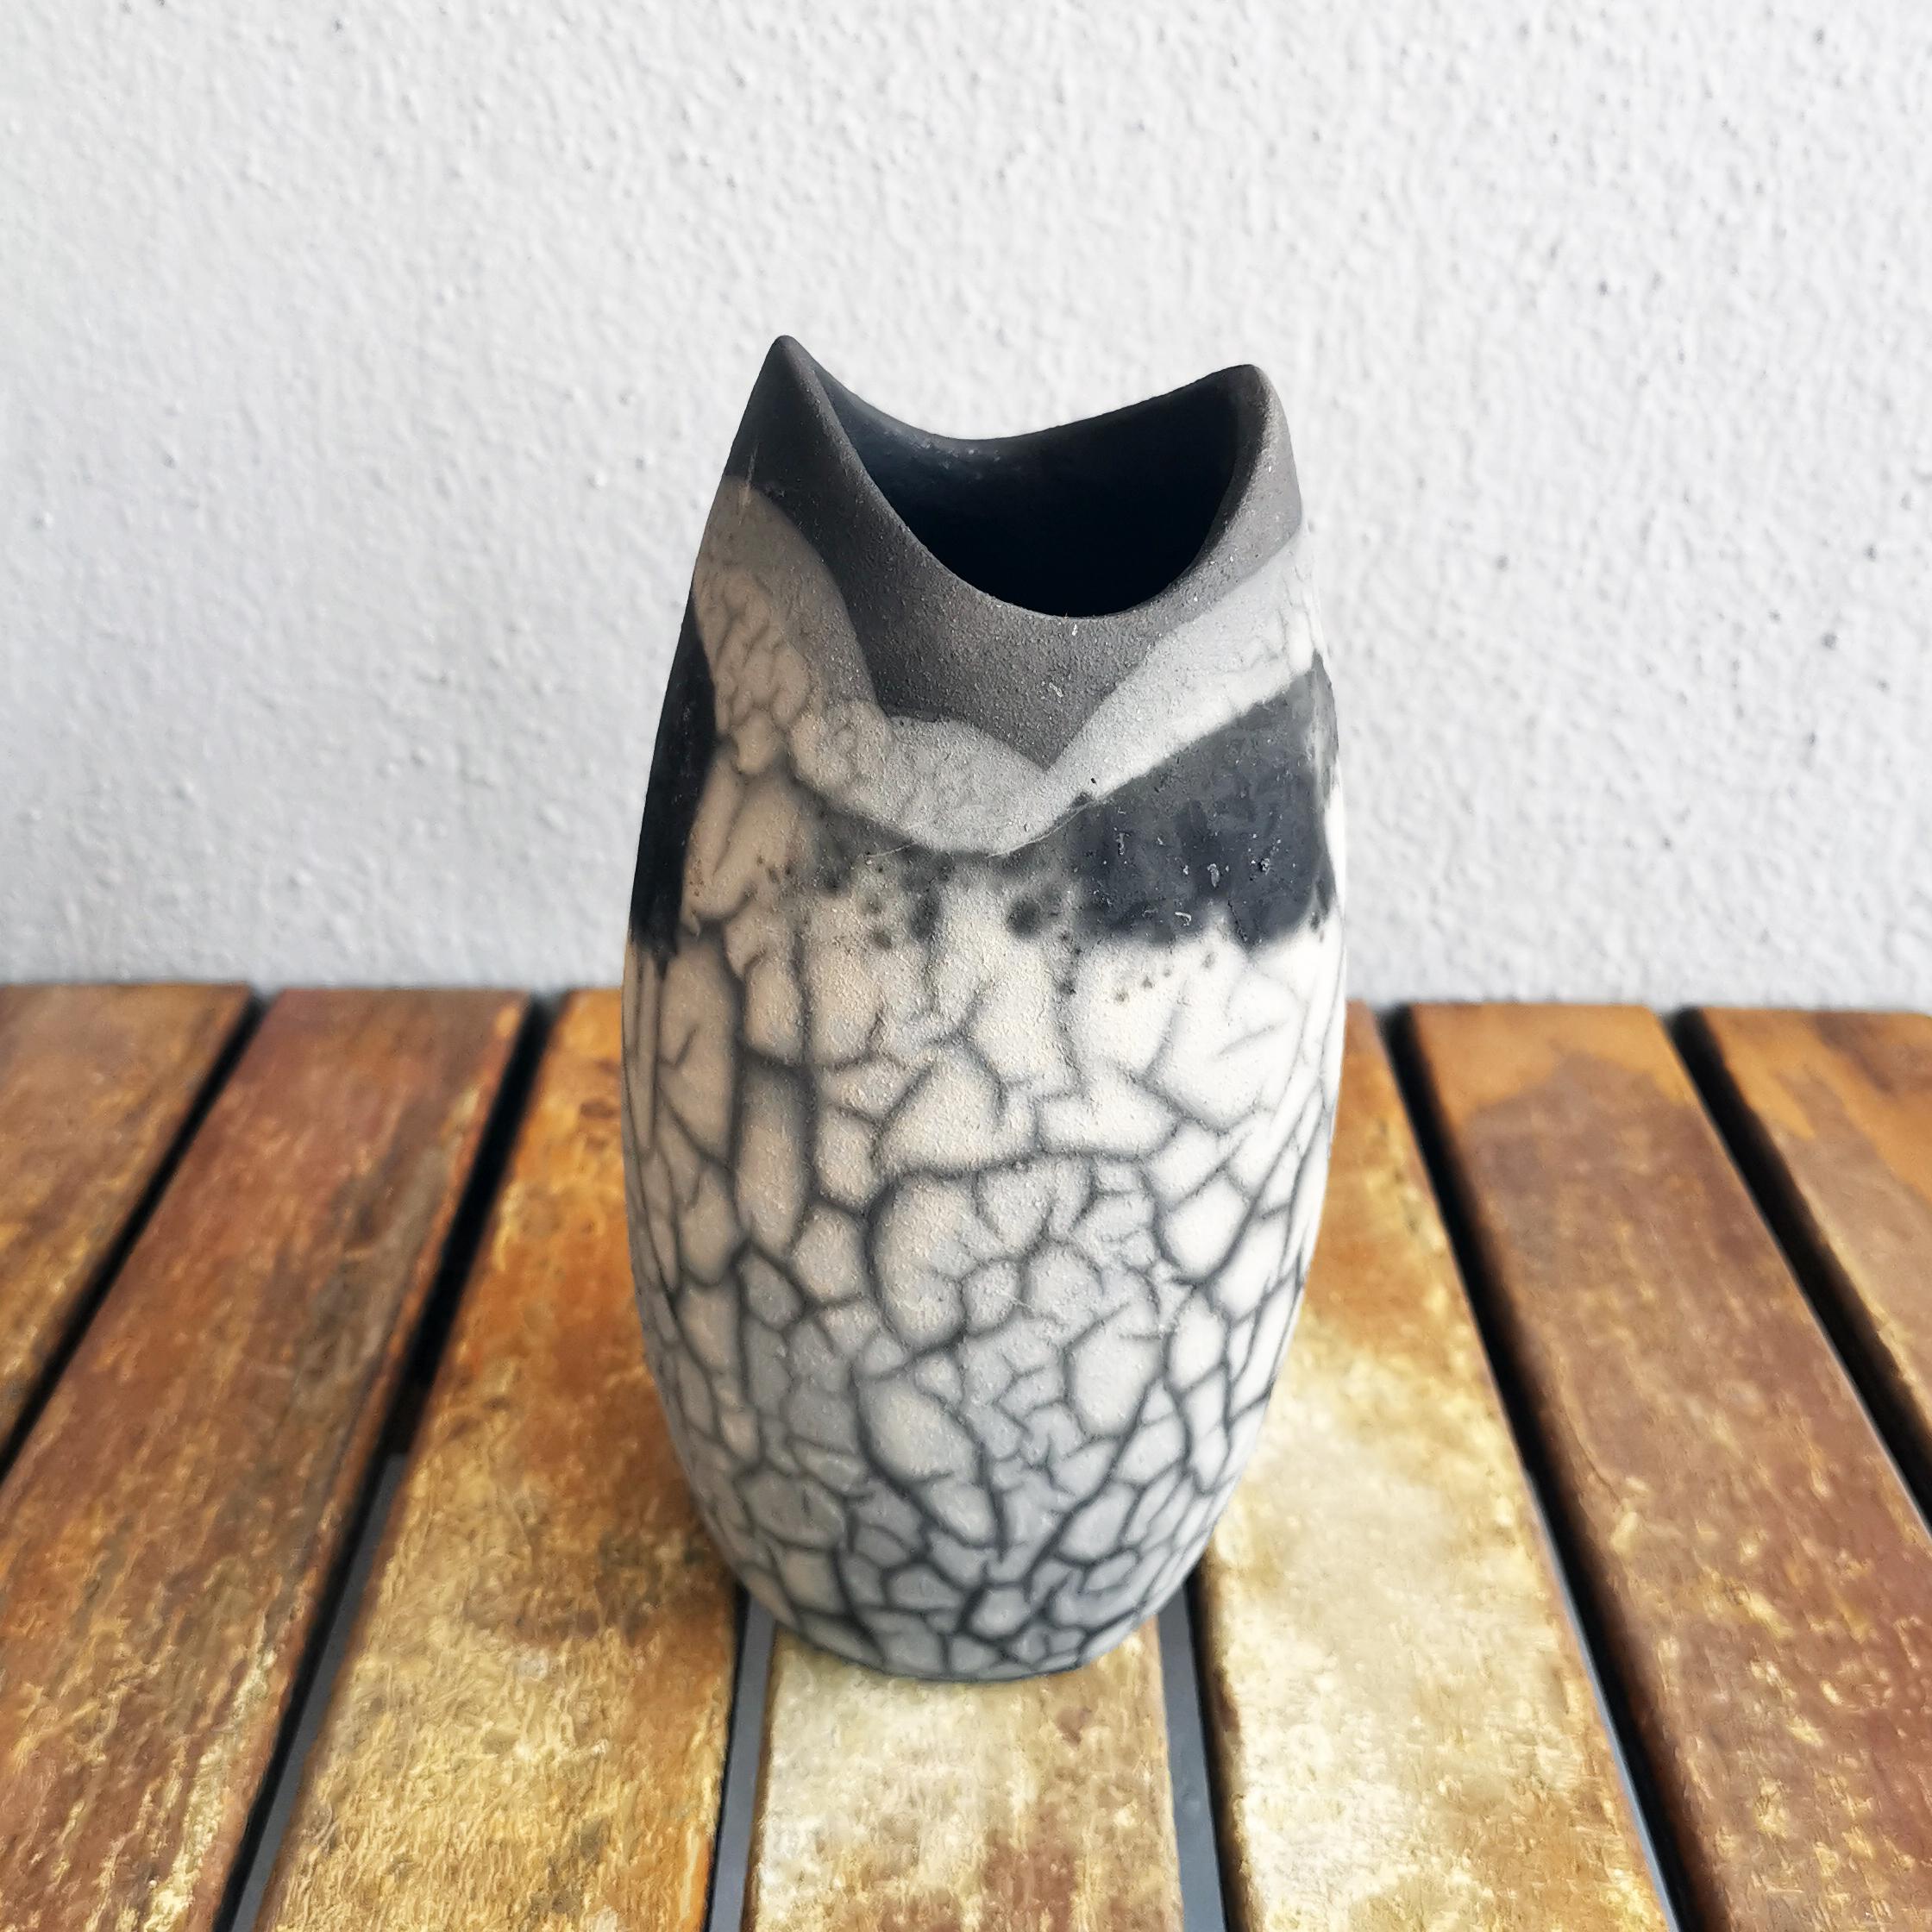 Koi (鯉 ) (n) carp

Our Koi vase is bottle-shaped with a wavy arched mouth which slightly resembles the mouth of a fish. Its eclectic design would blend in well in any interior décor style.

The Koi vase can be displayed on its own or used to hold